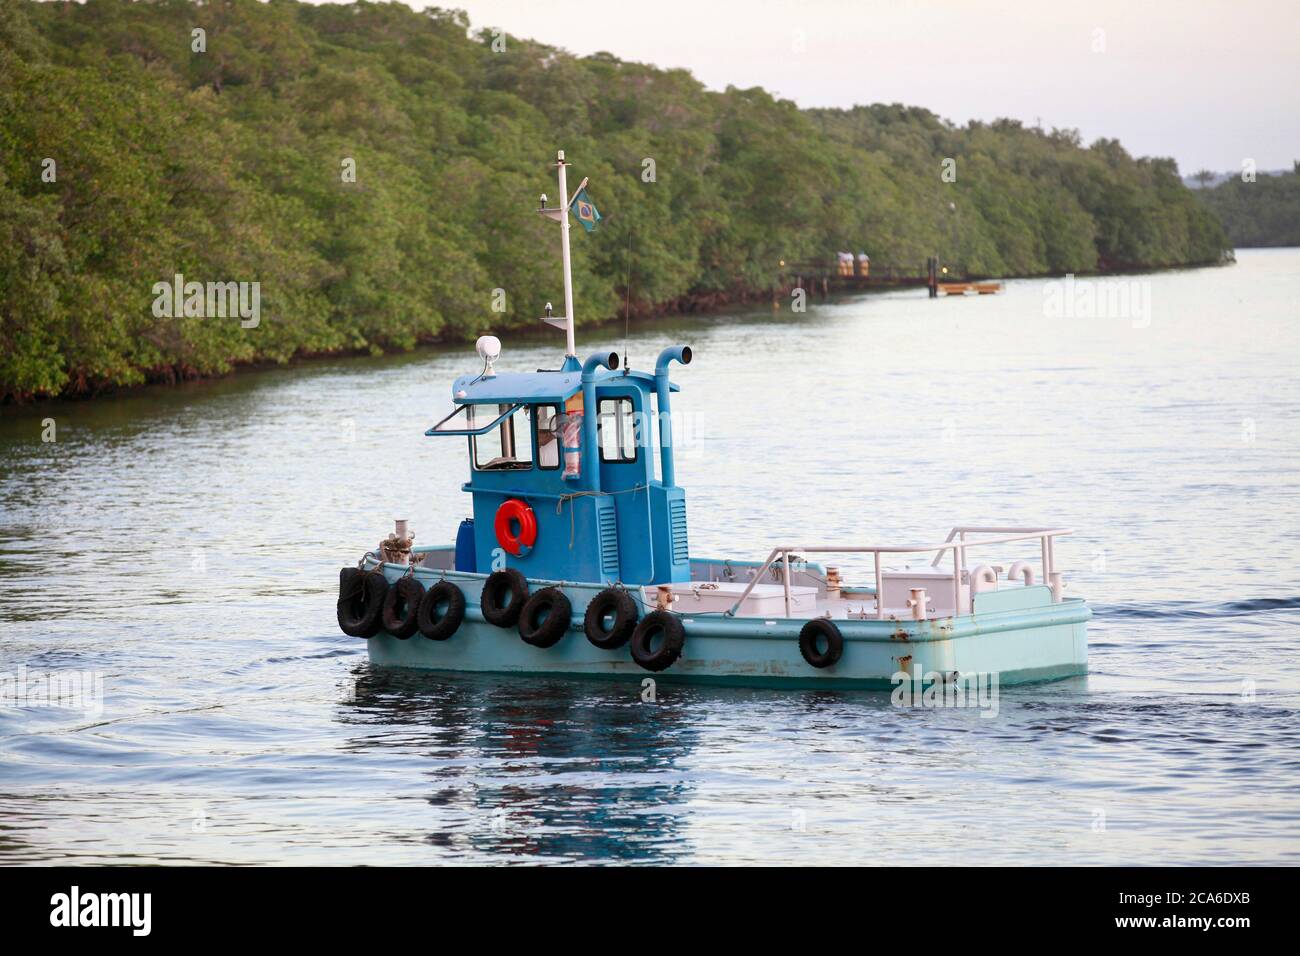 COMANDATUBA, BAHIA, BRAZIL - AUG 02, 2013 - tugboat in river to assistance others boats Stock Photo